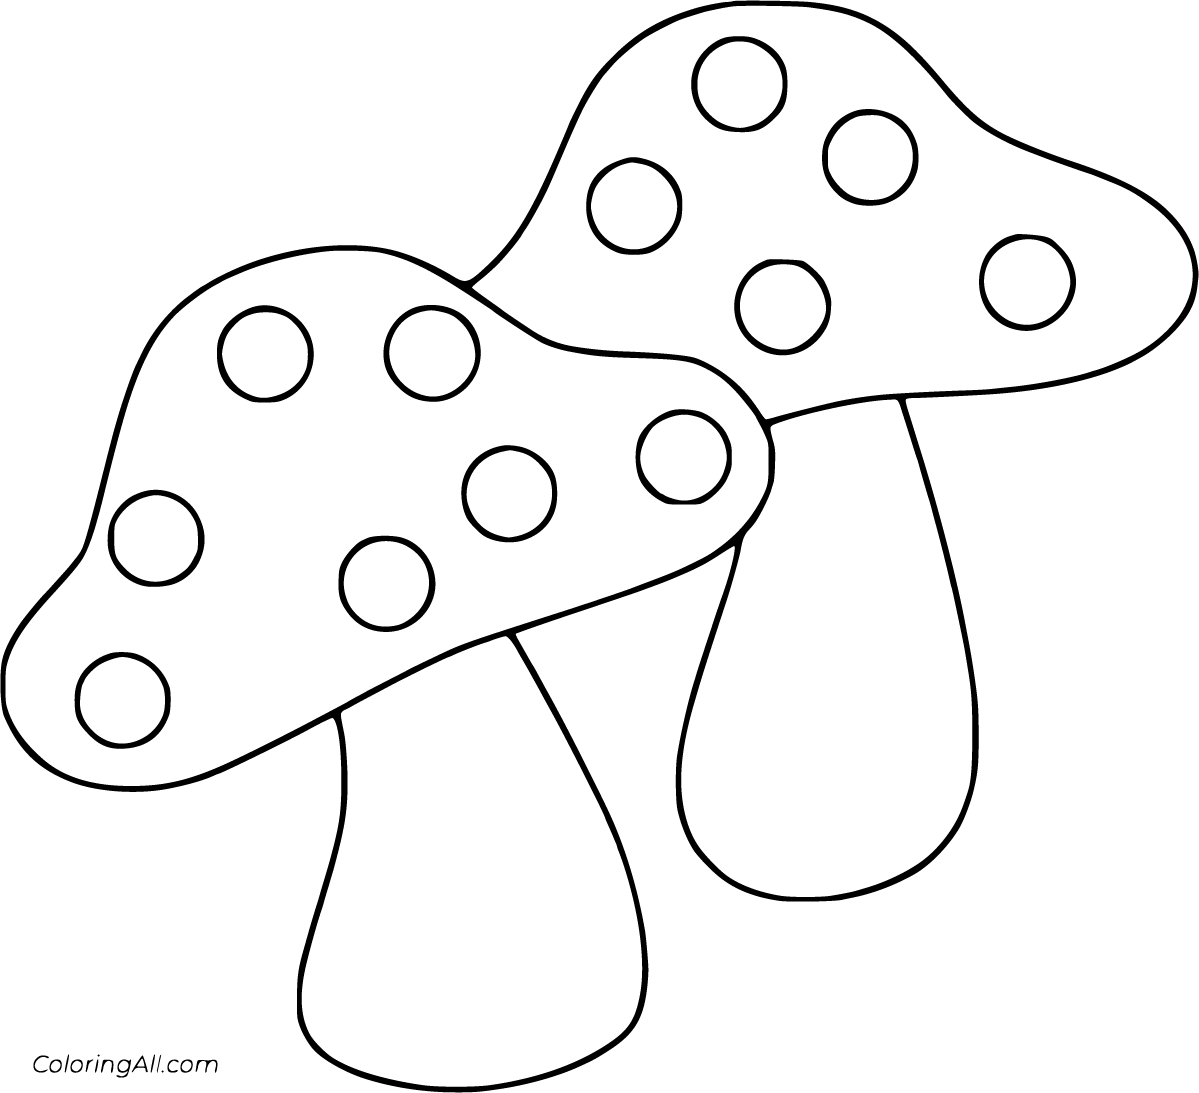 Mushroom Coloring Pages (26 Free Printables) - ColoringAll